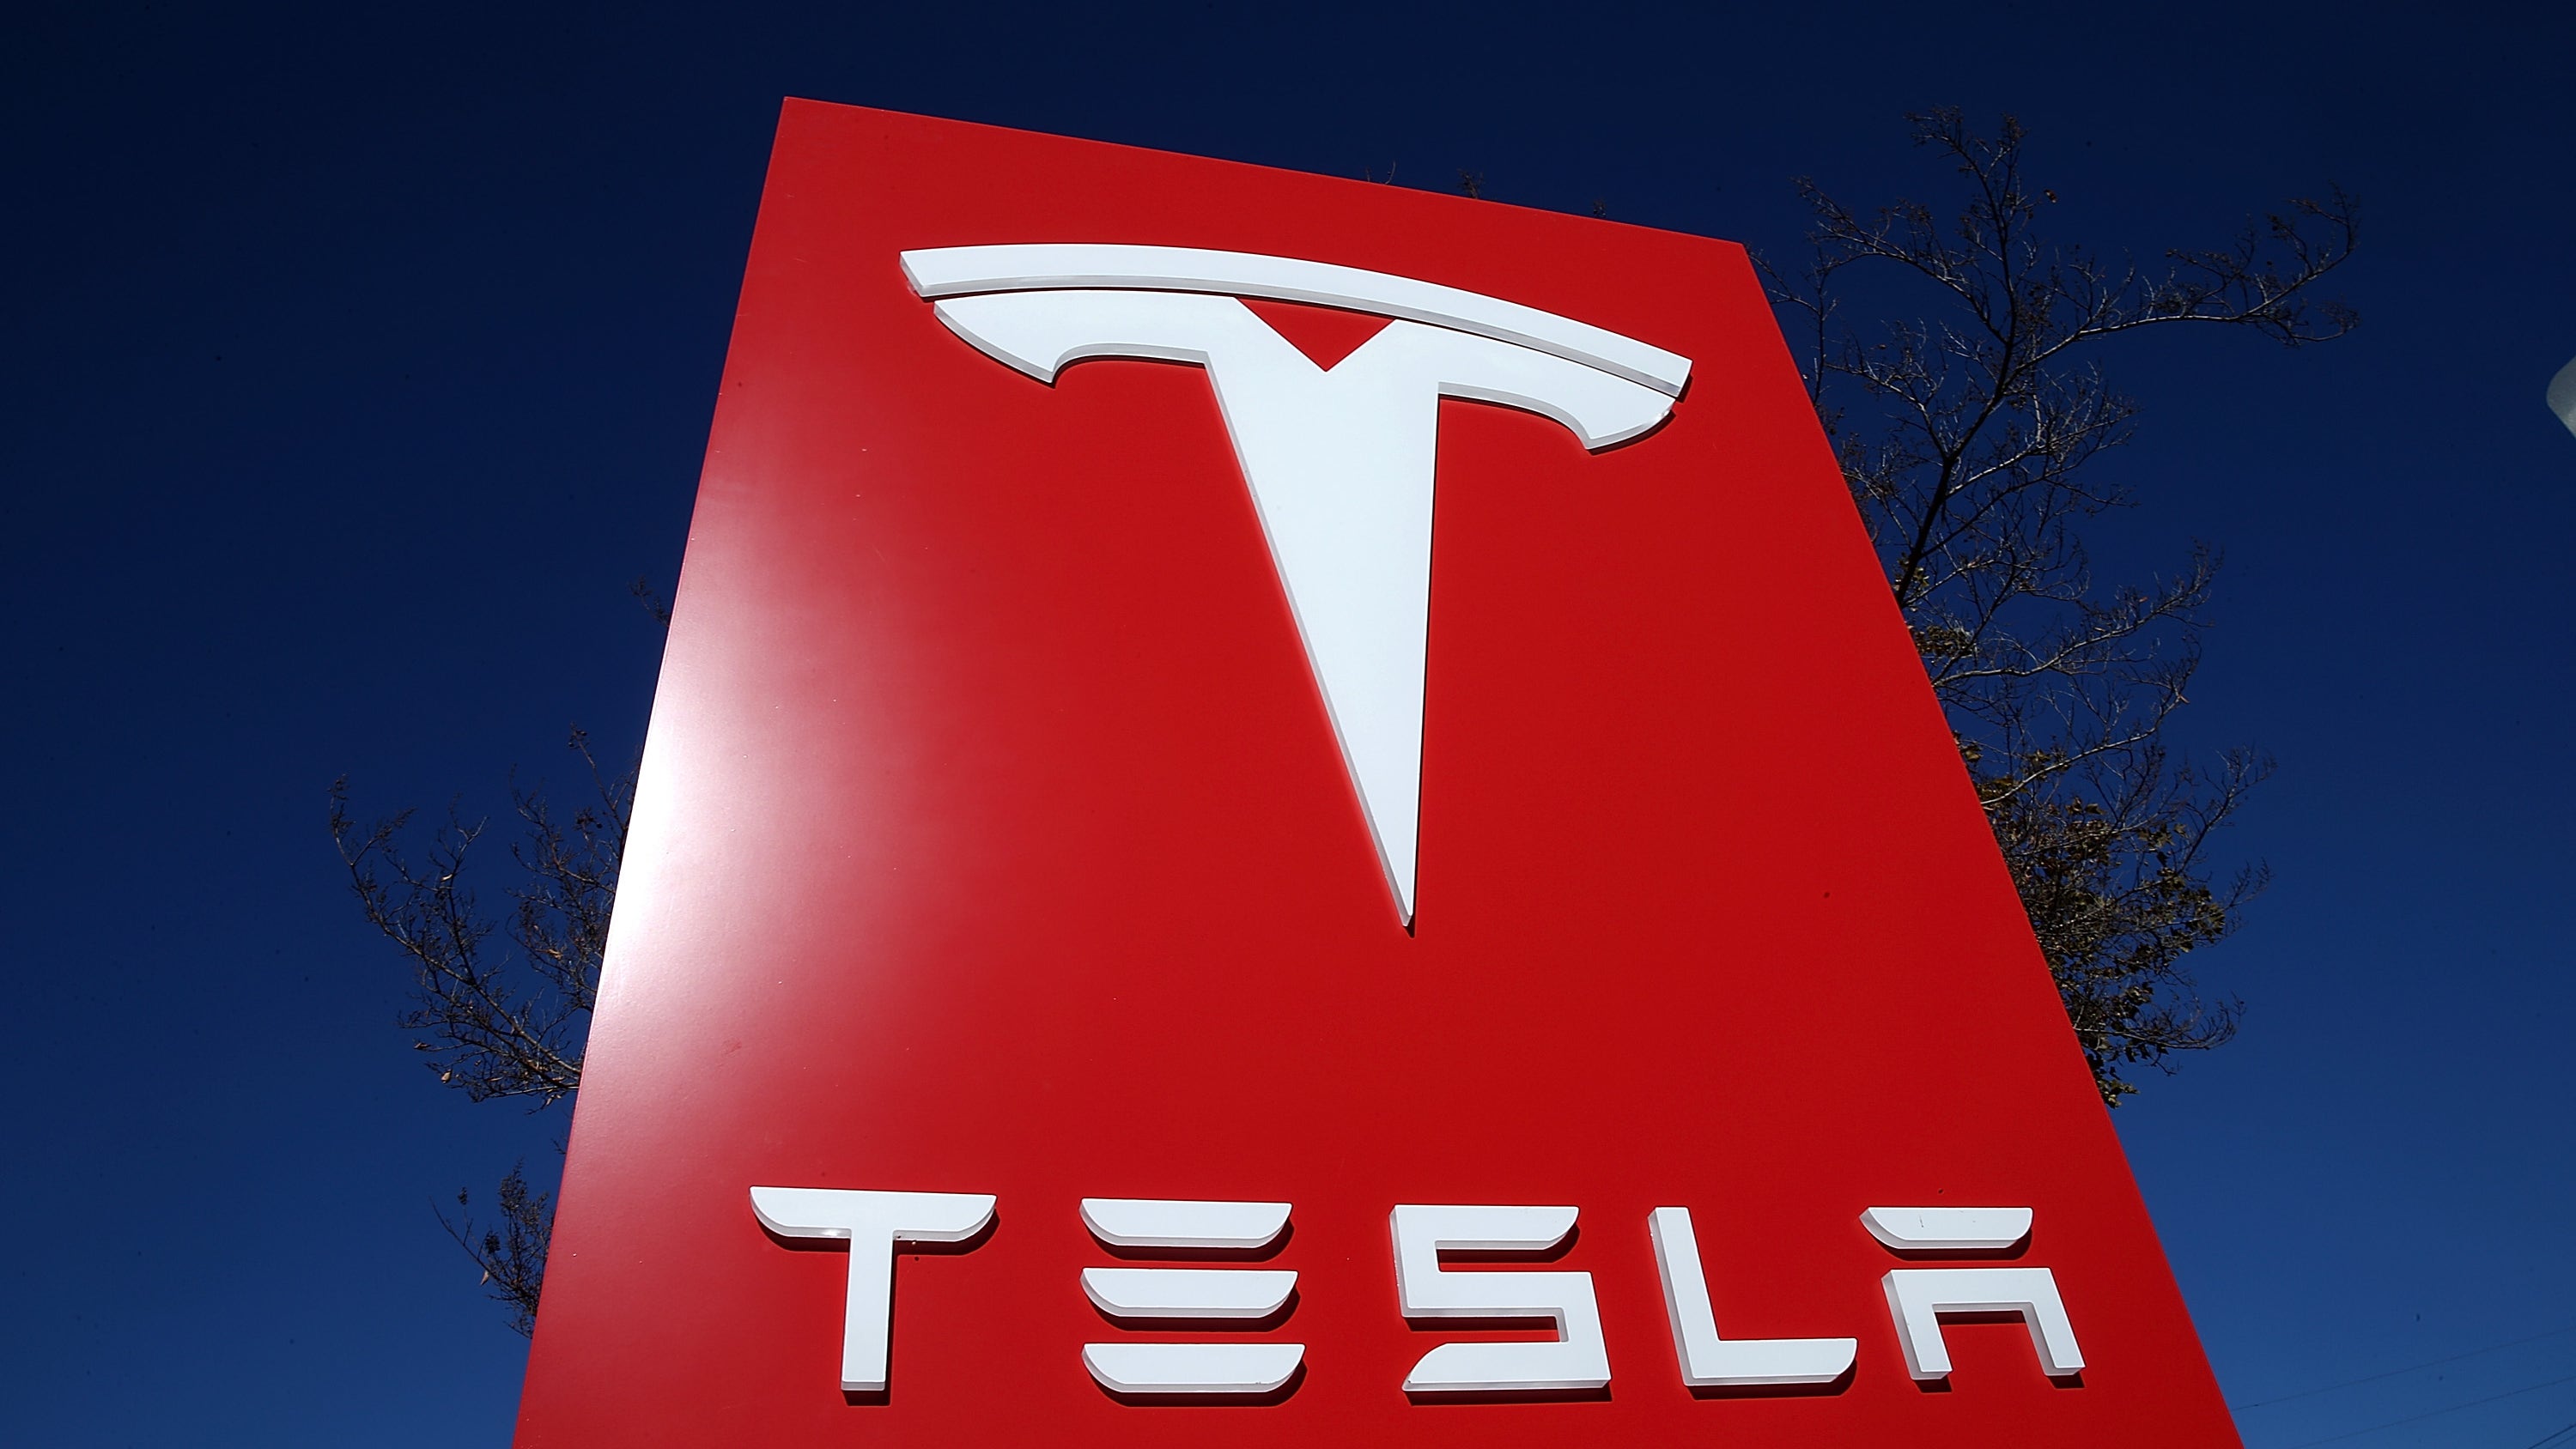 5. Tesla stock currently trading at a lower value than predicted by Baird analyst